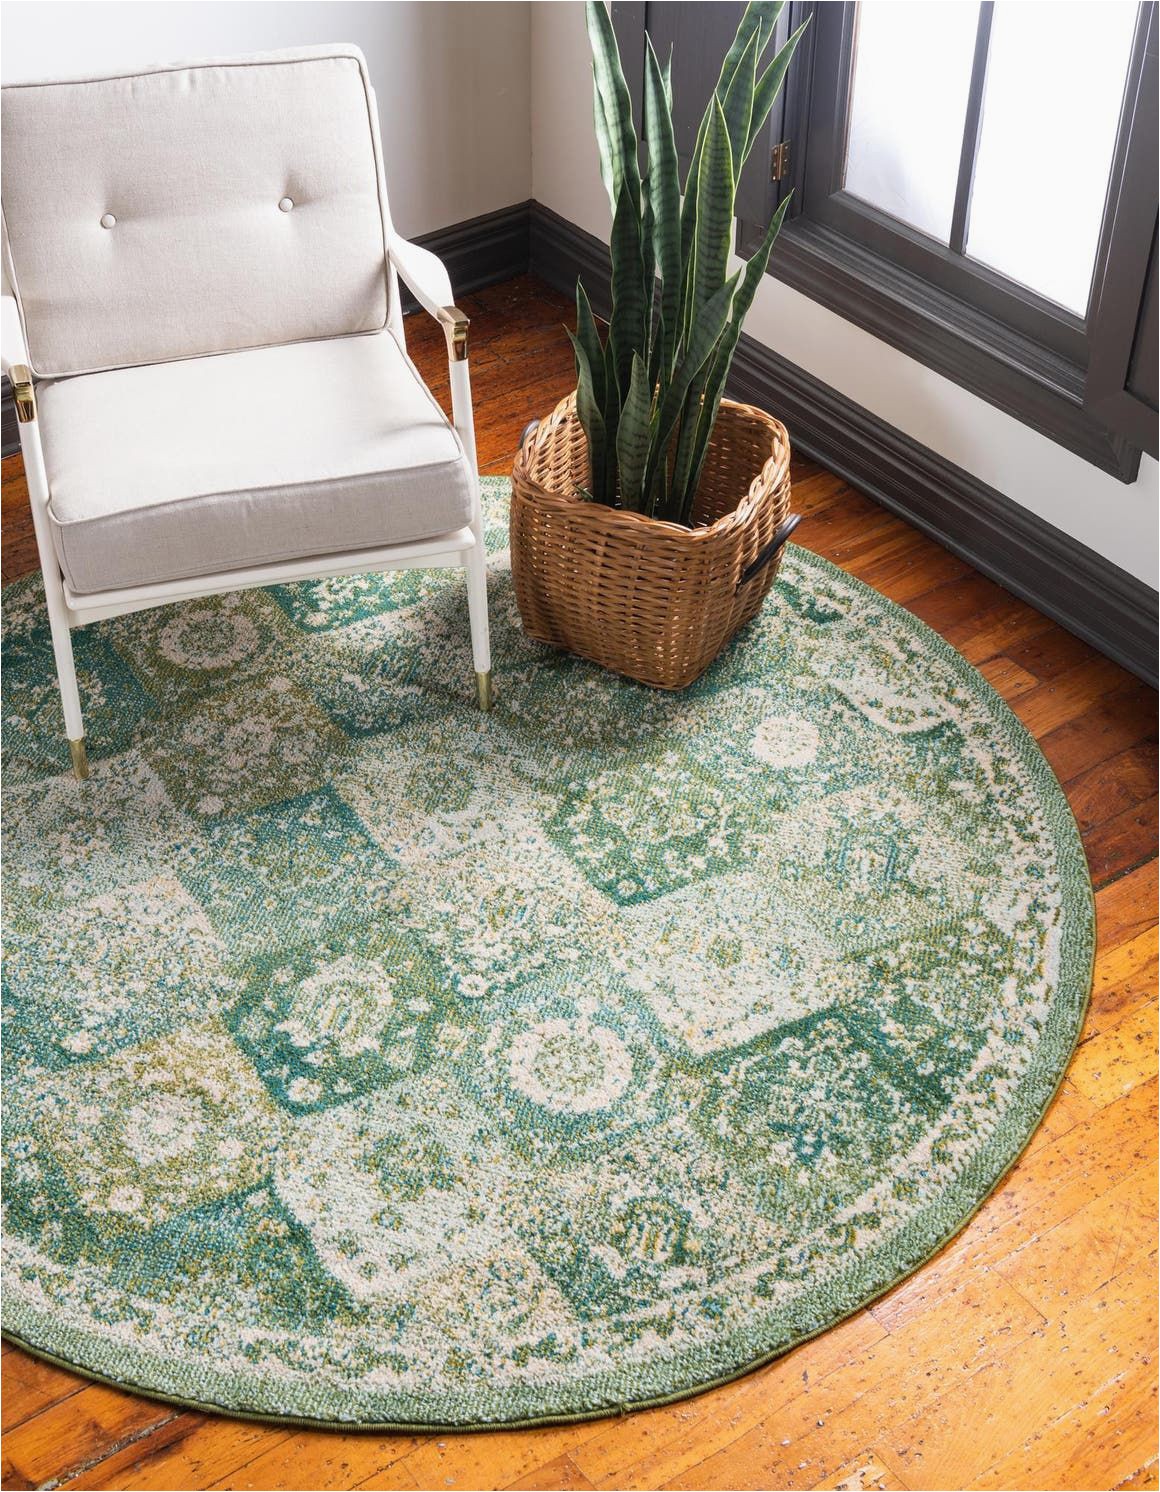 3 Foot Round area Rugs Madeline Green Vintage 3 Ft Round area Rug In 2020